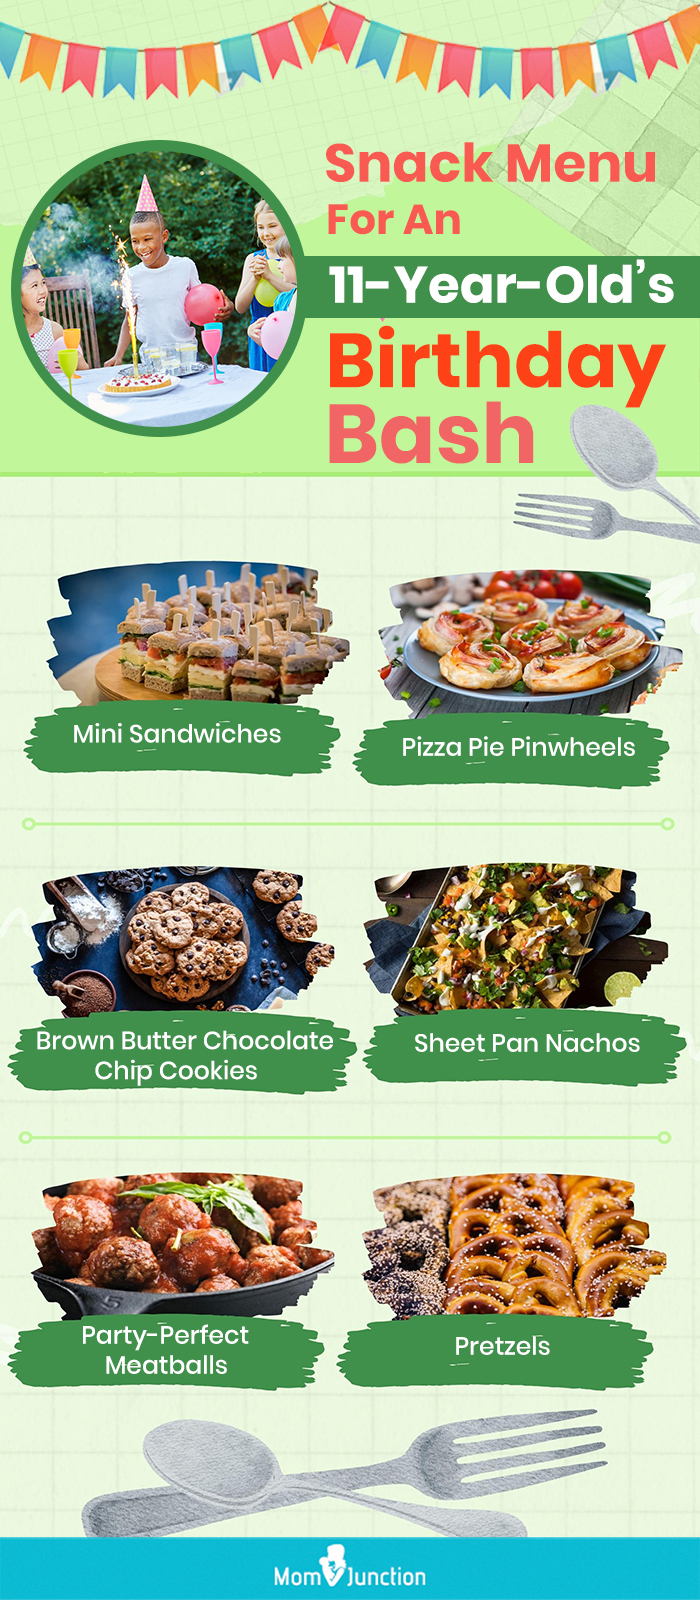 snack ideas for 11 year old birthday [infographic]